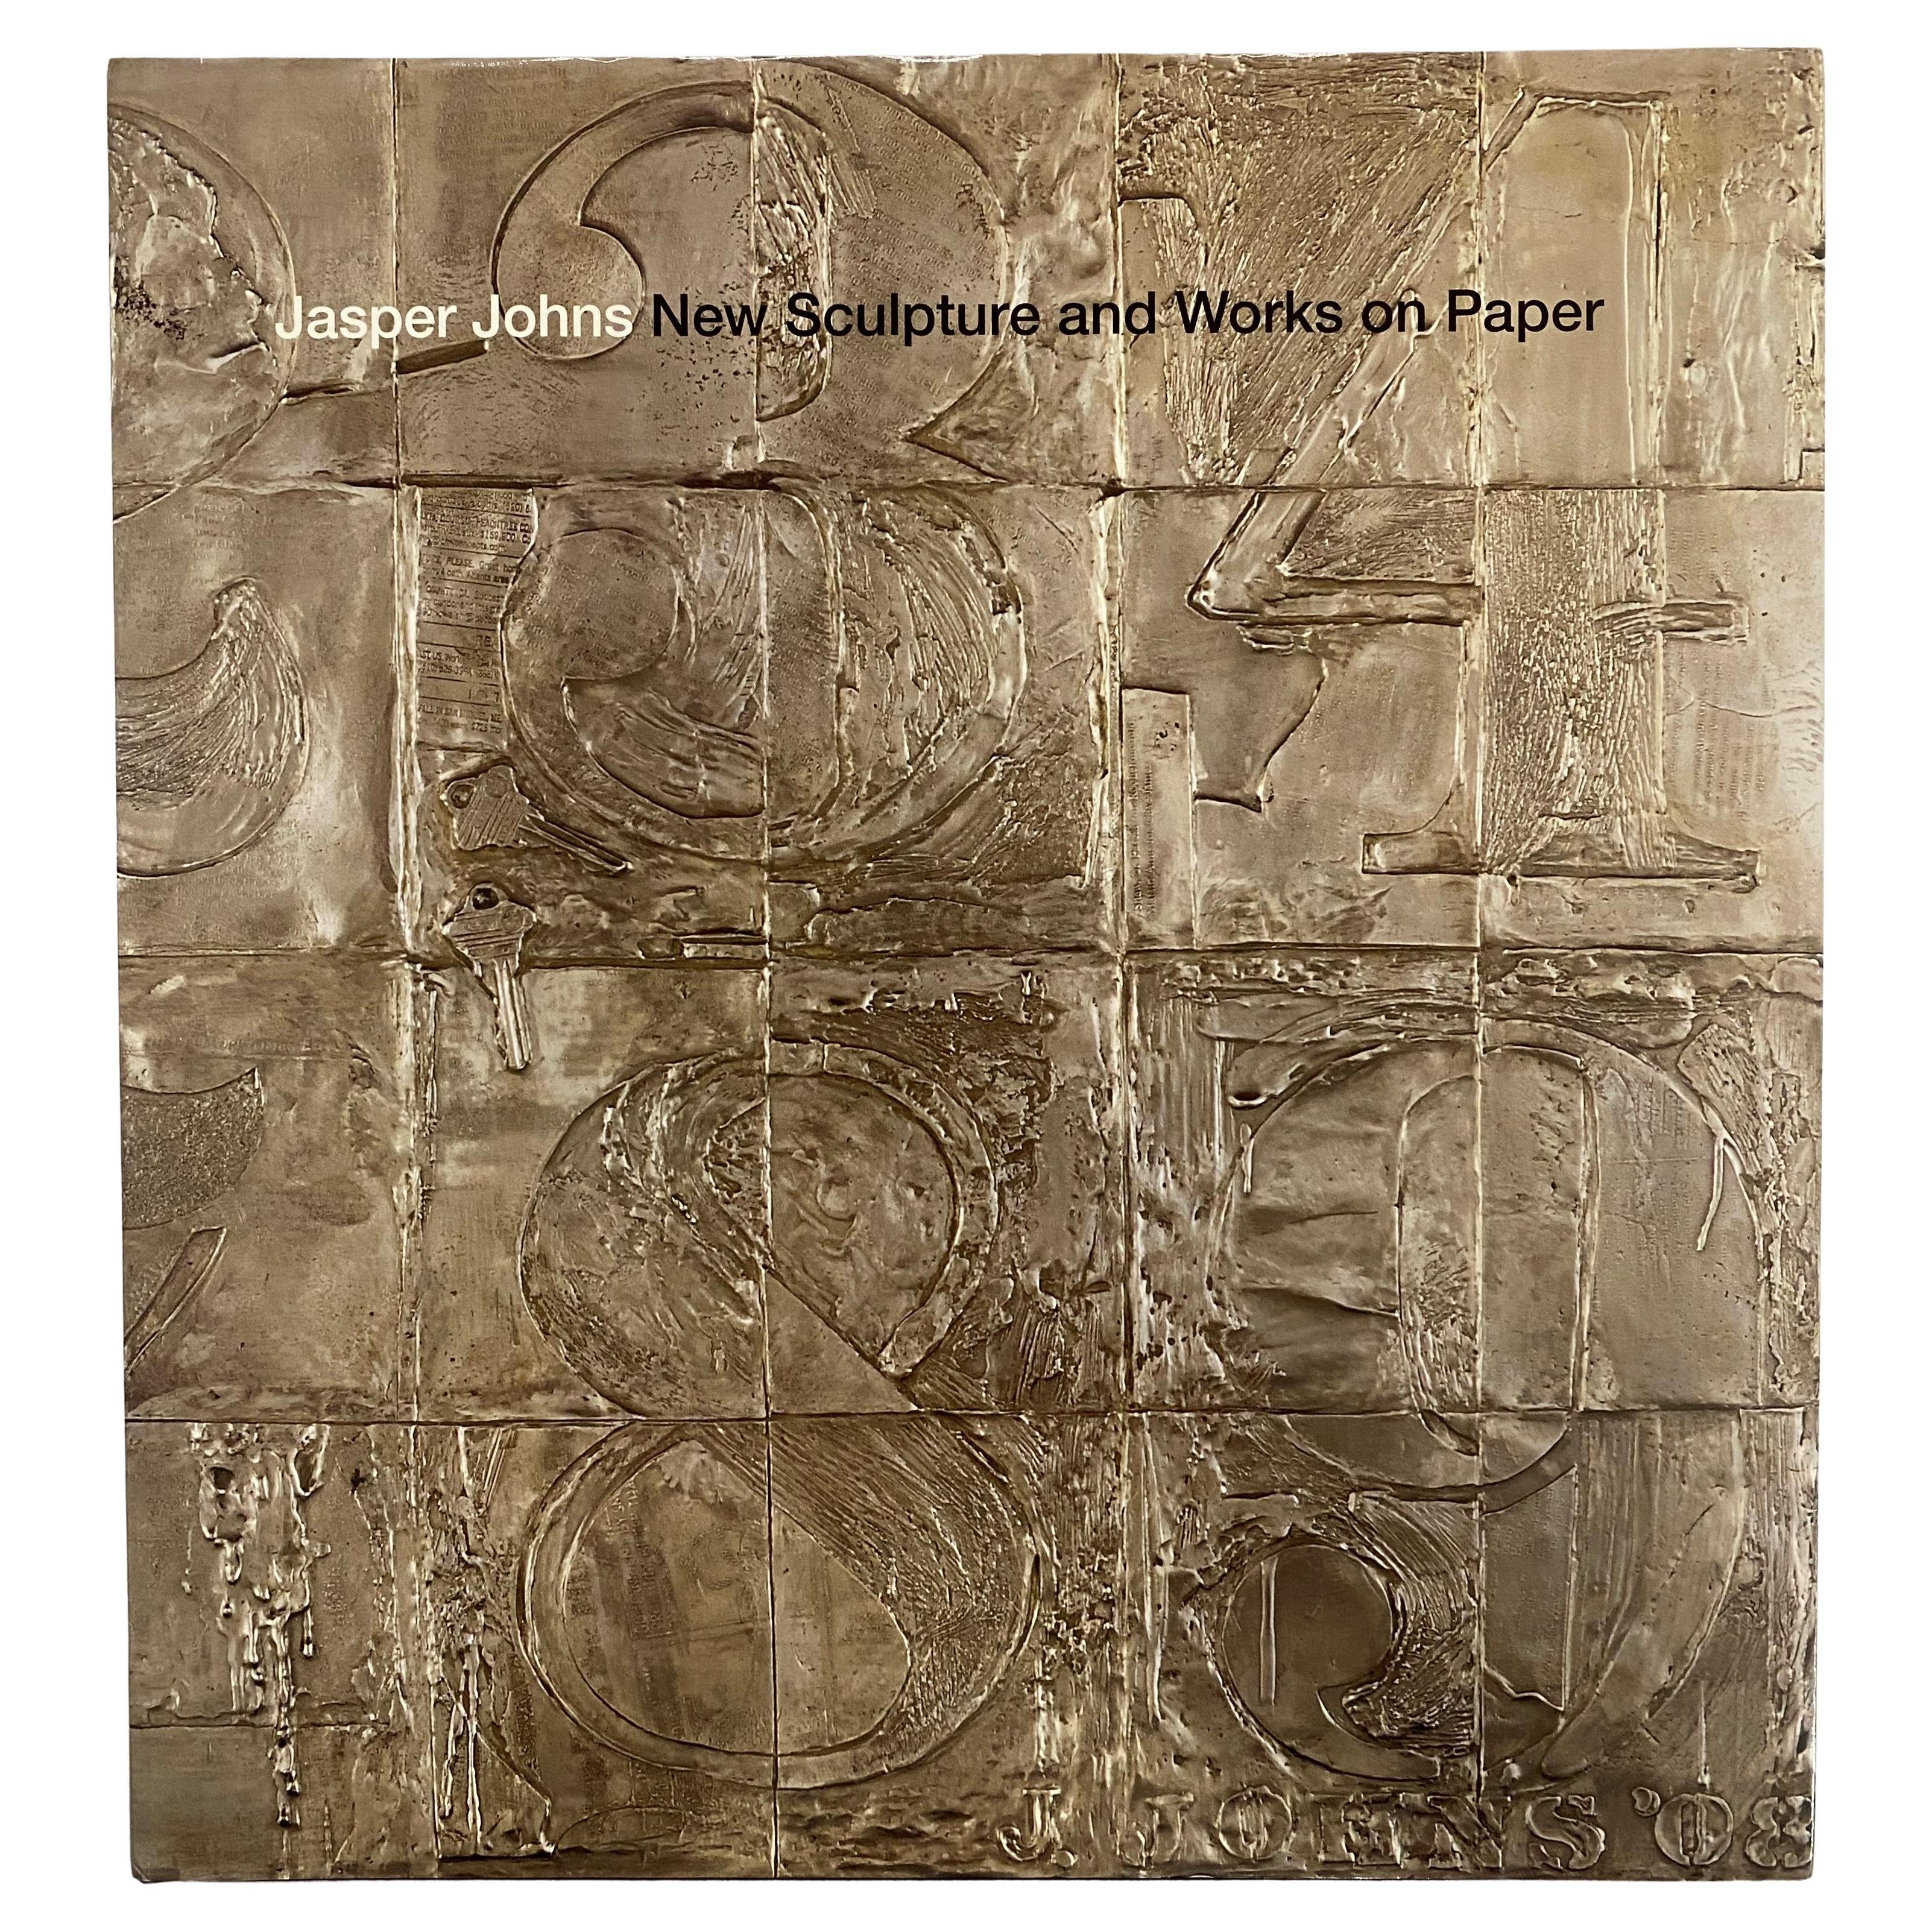 Jasper Johns: New Sculpture and Works on Paper (Book)